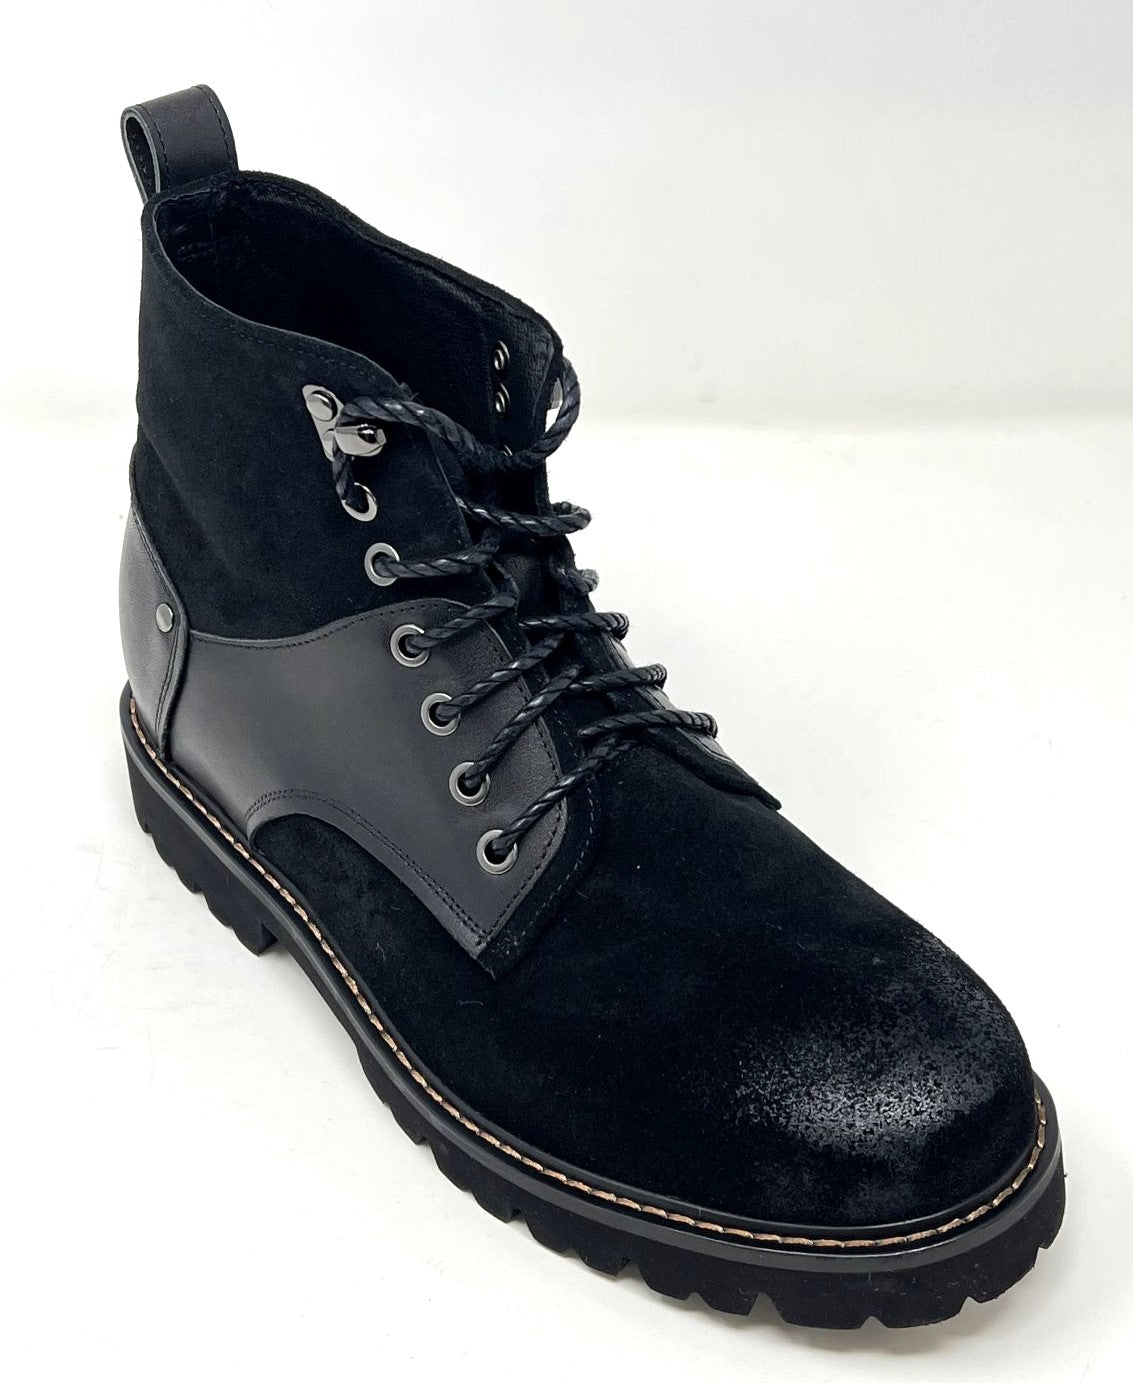 FSK0126 - 3.6 Inches Taller (Black) - Size 7 Only